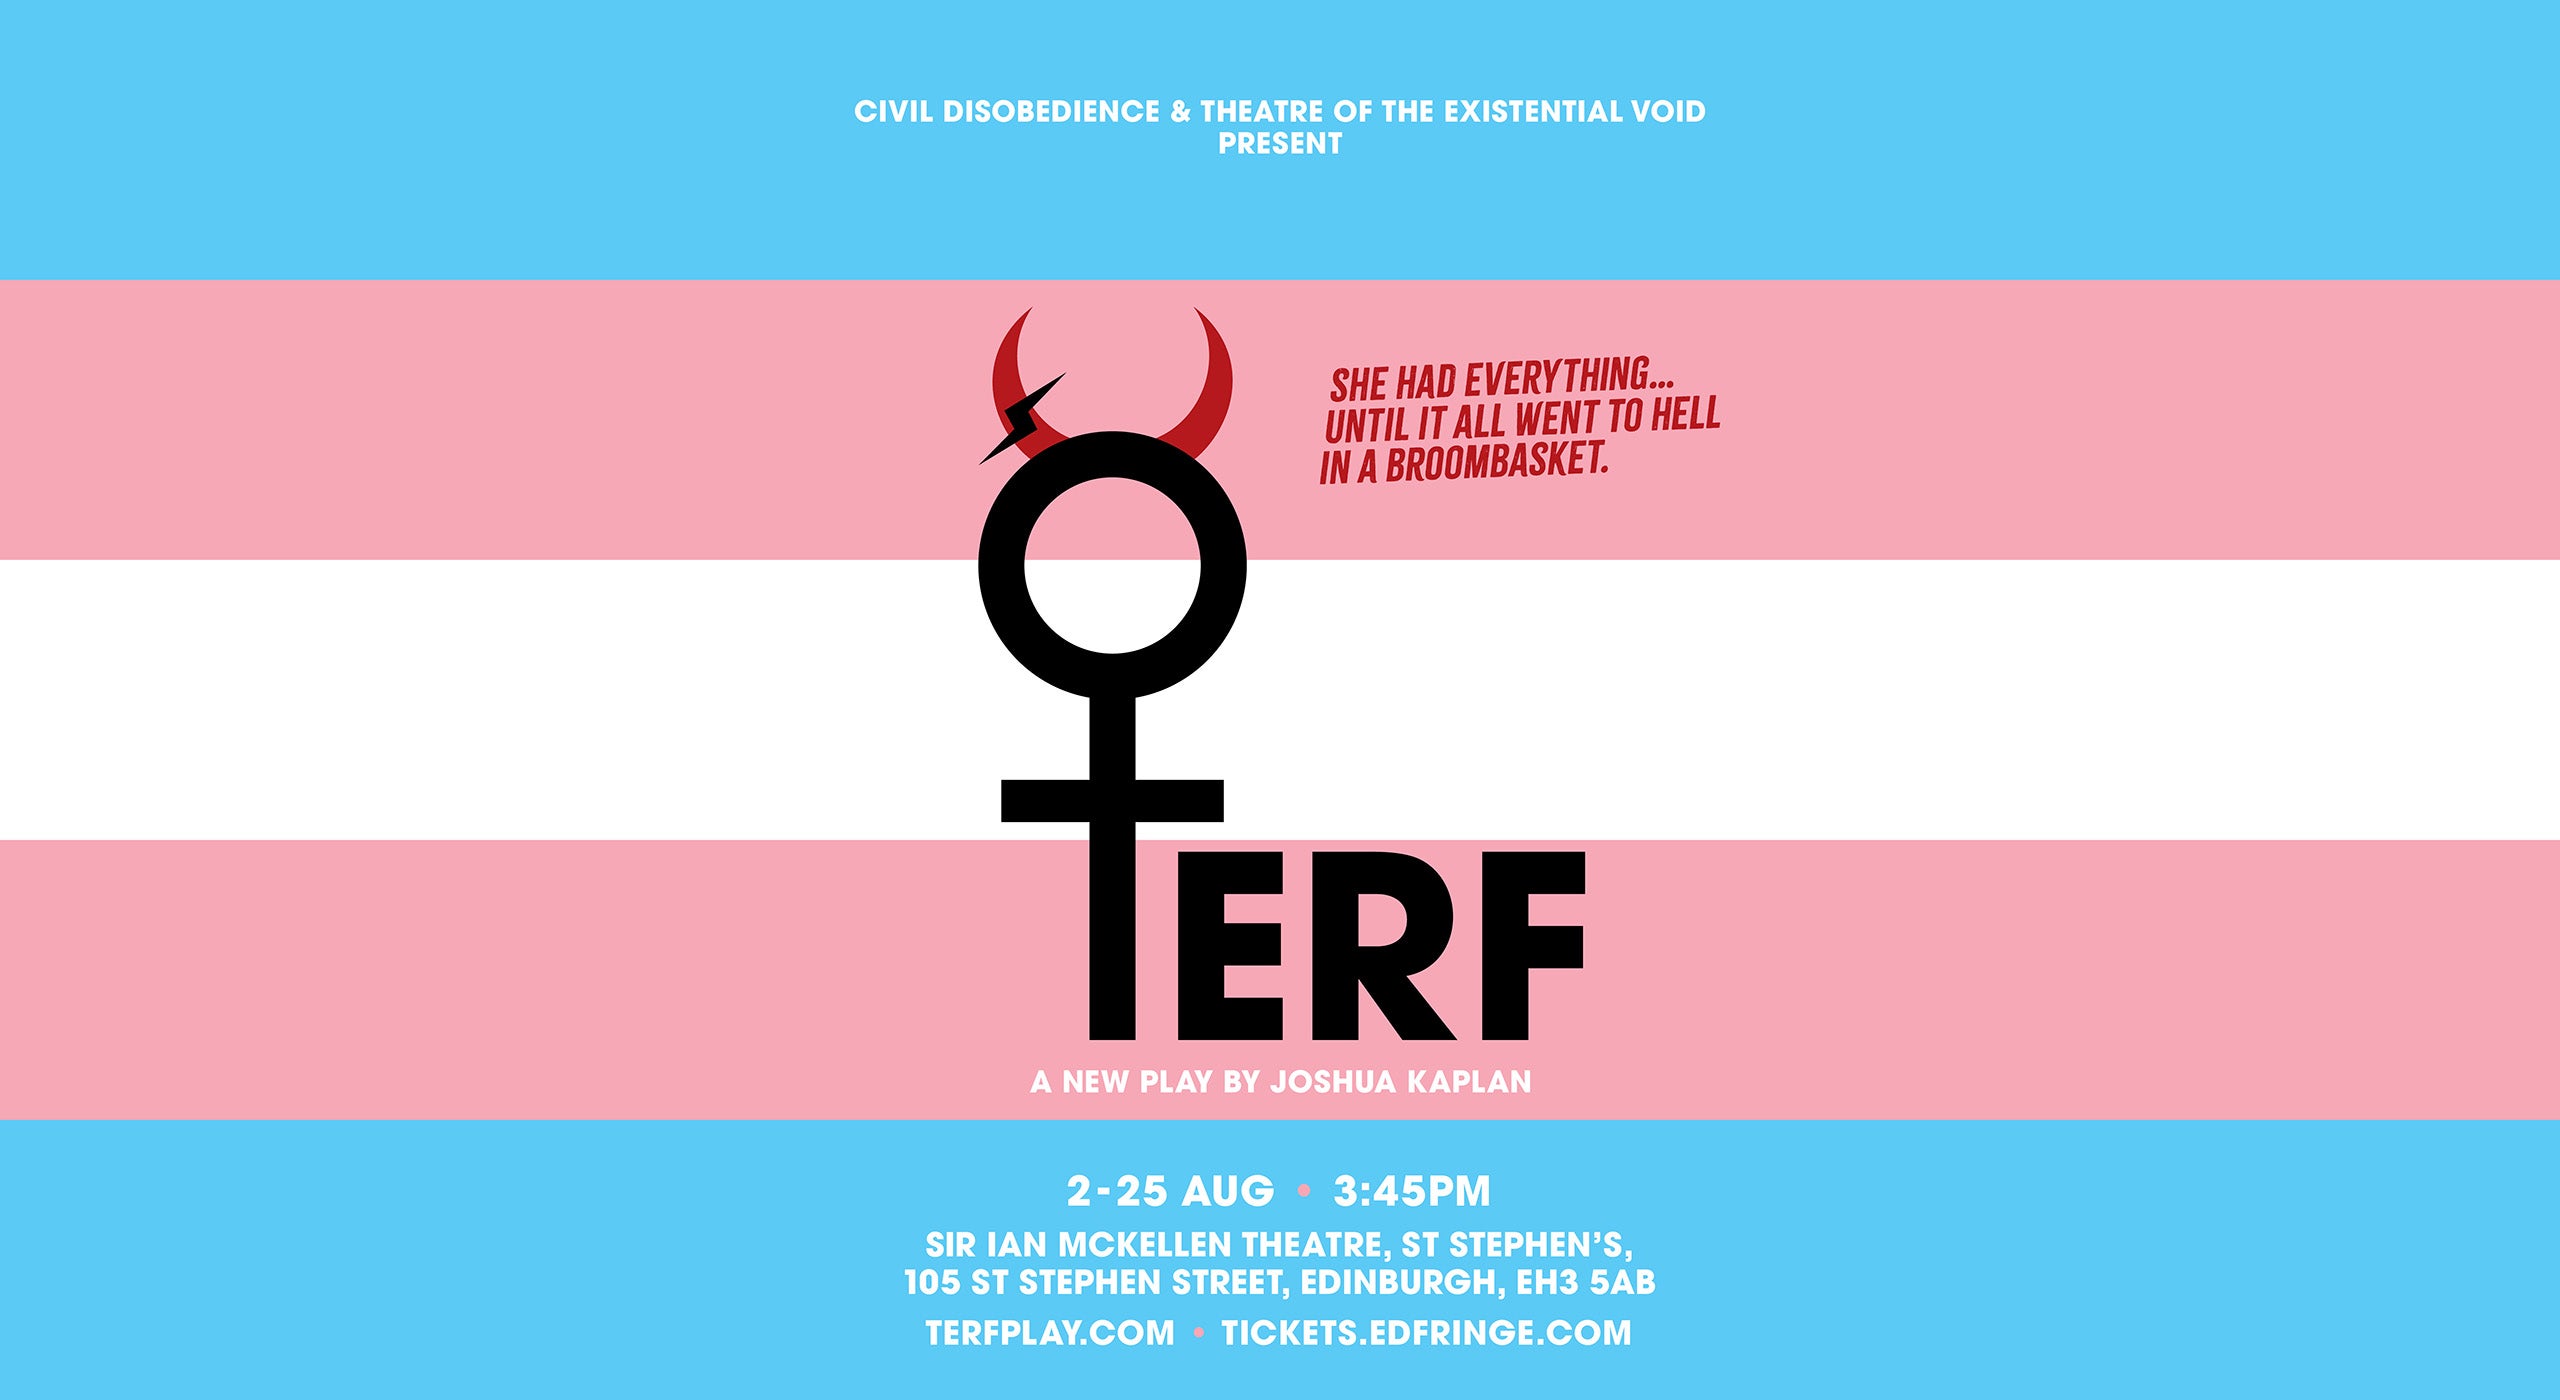 Tickets for TERF are now on sale.